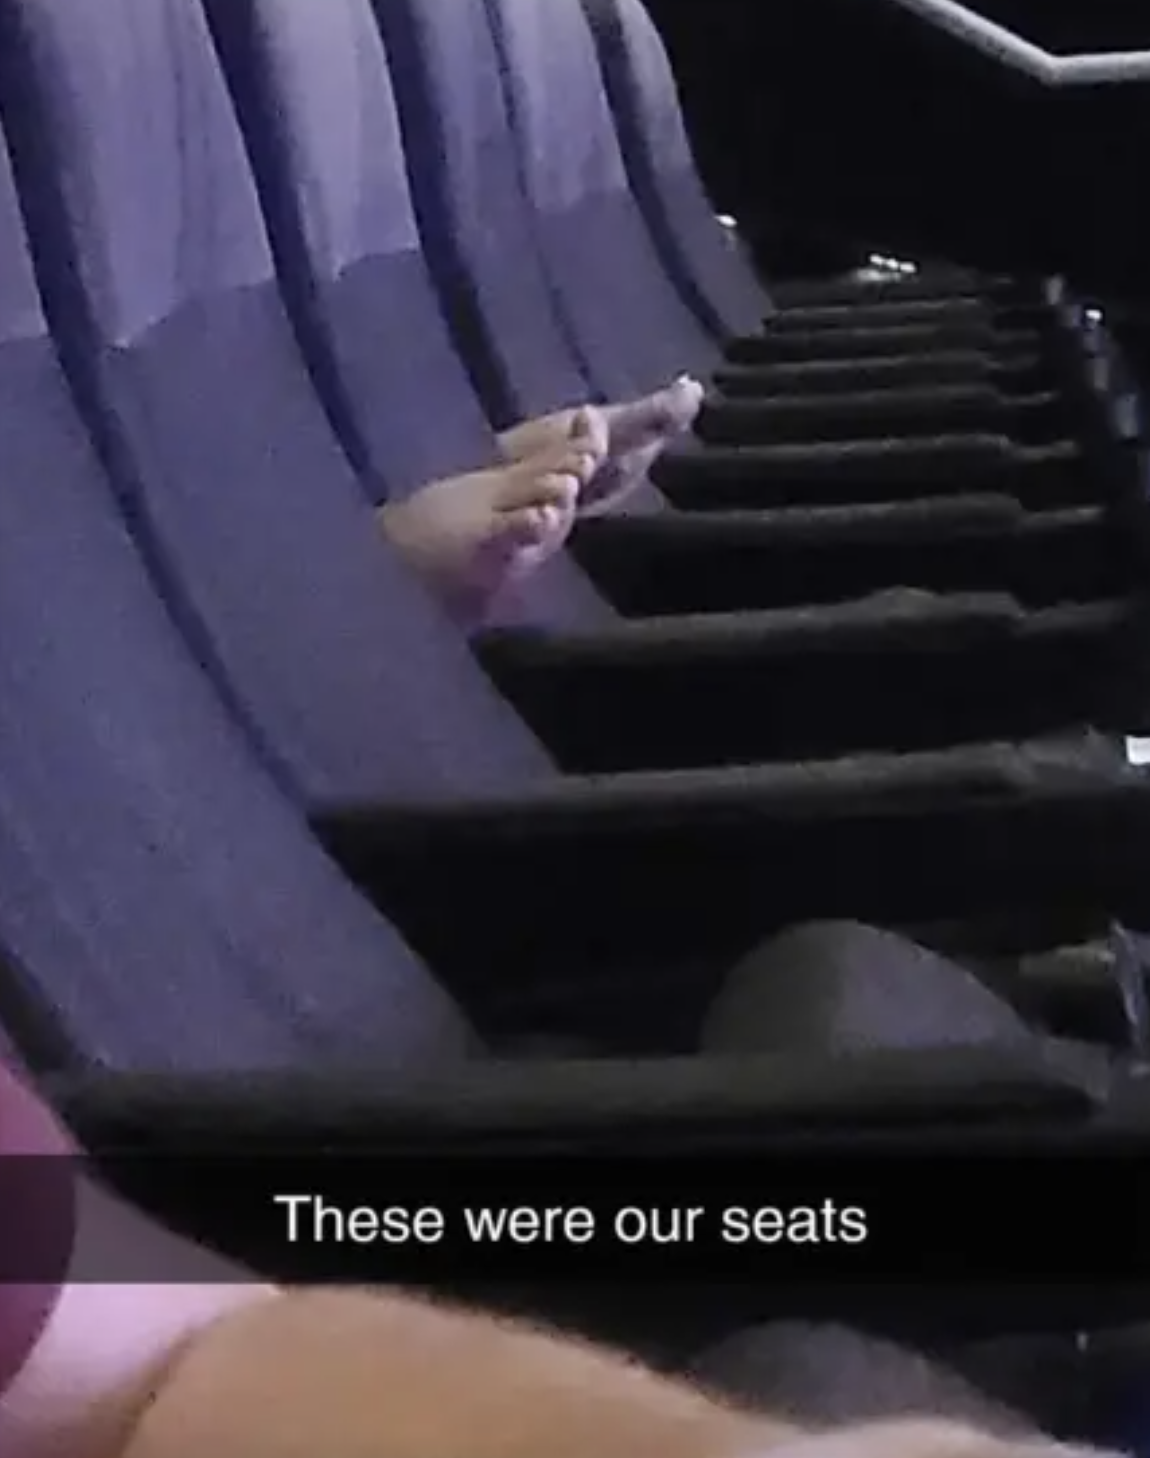 Photo of several empty theater seats with a person&#x27;s hand indicating their assigned seating area; text overlay &quot;These were our seats&quot;